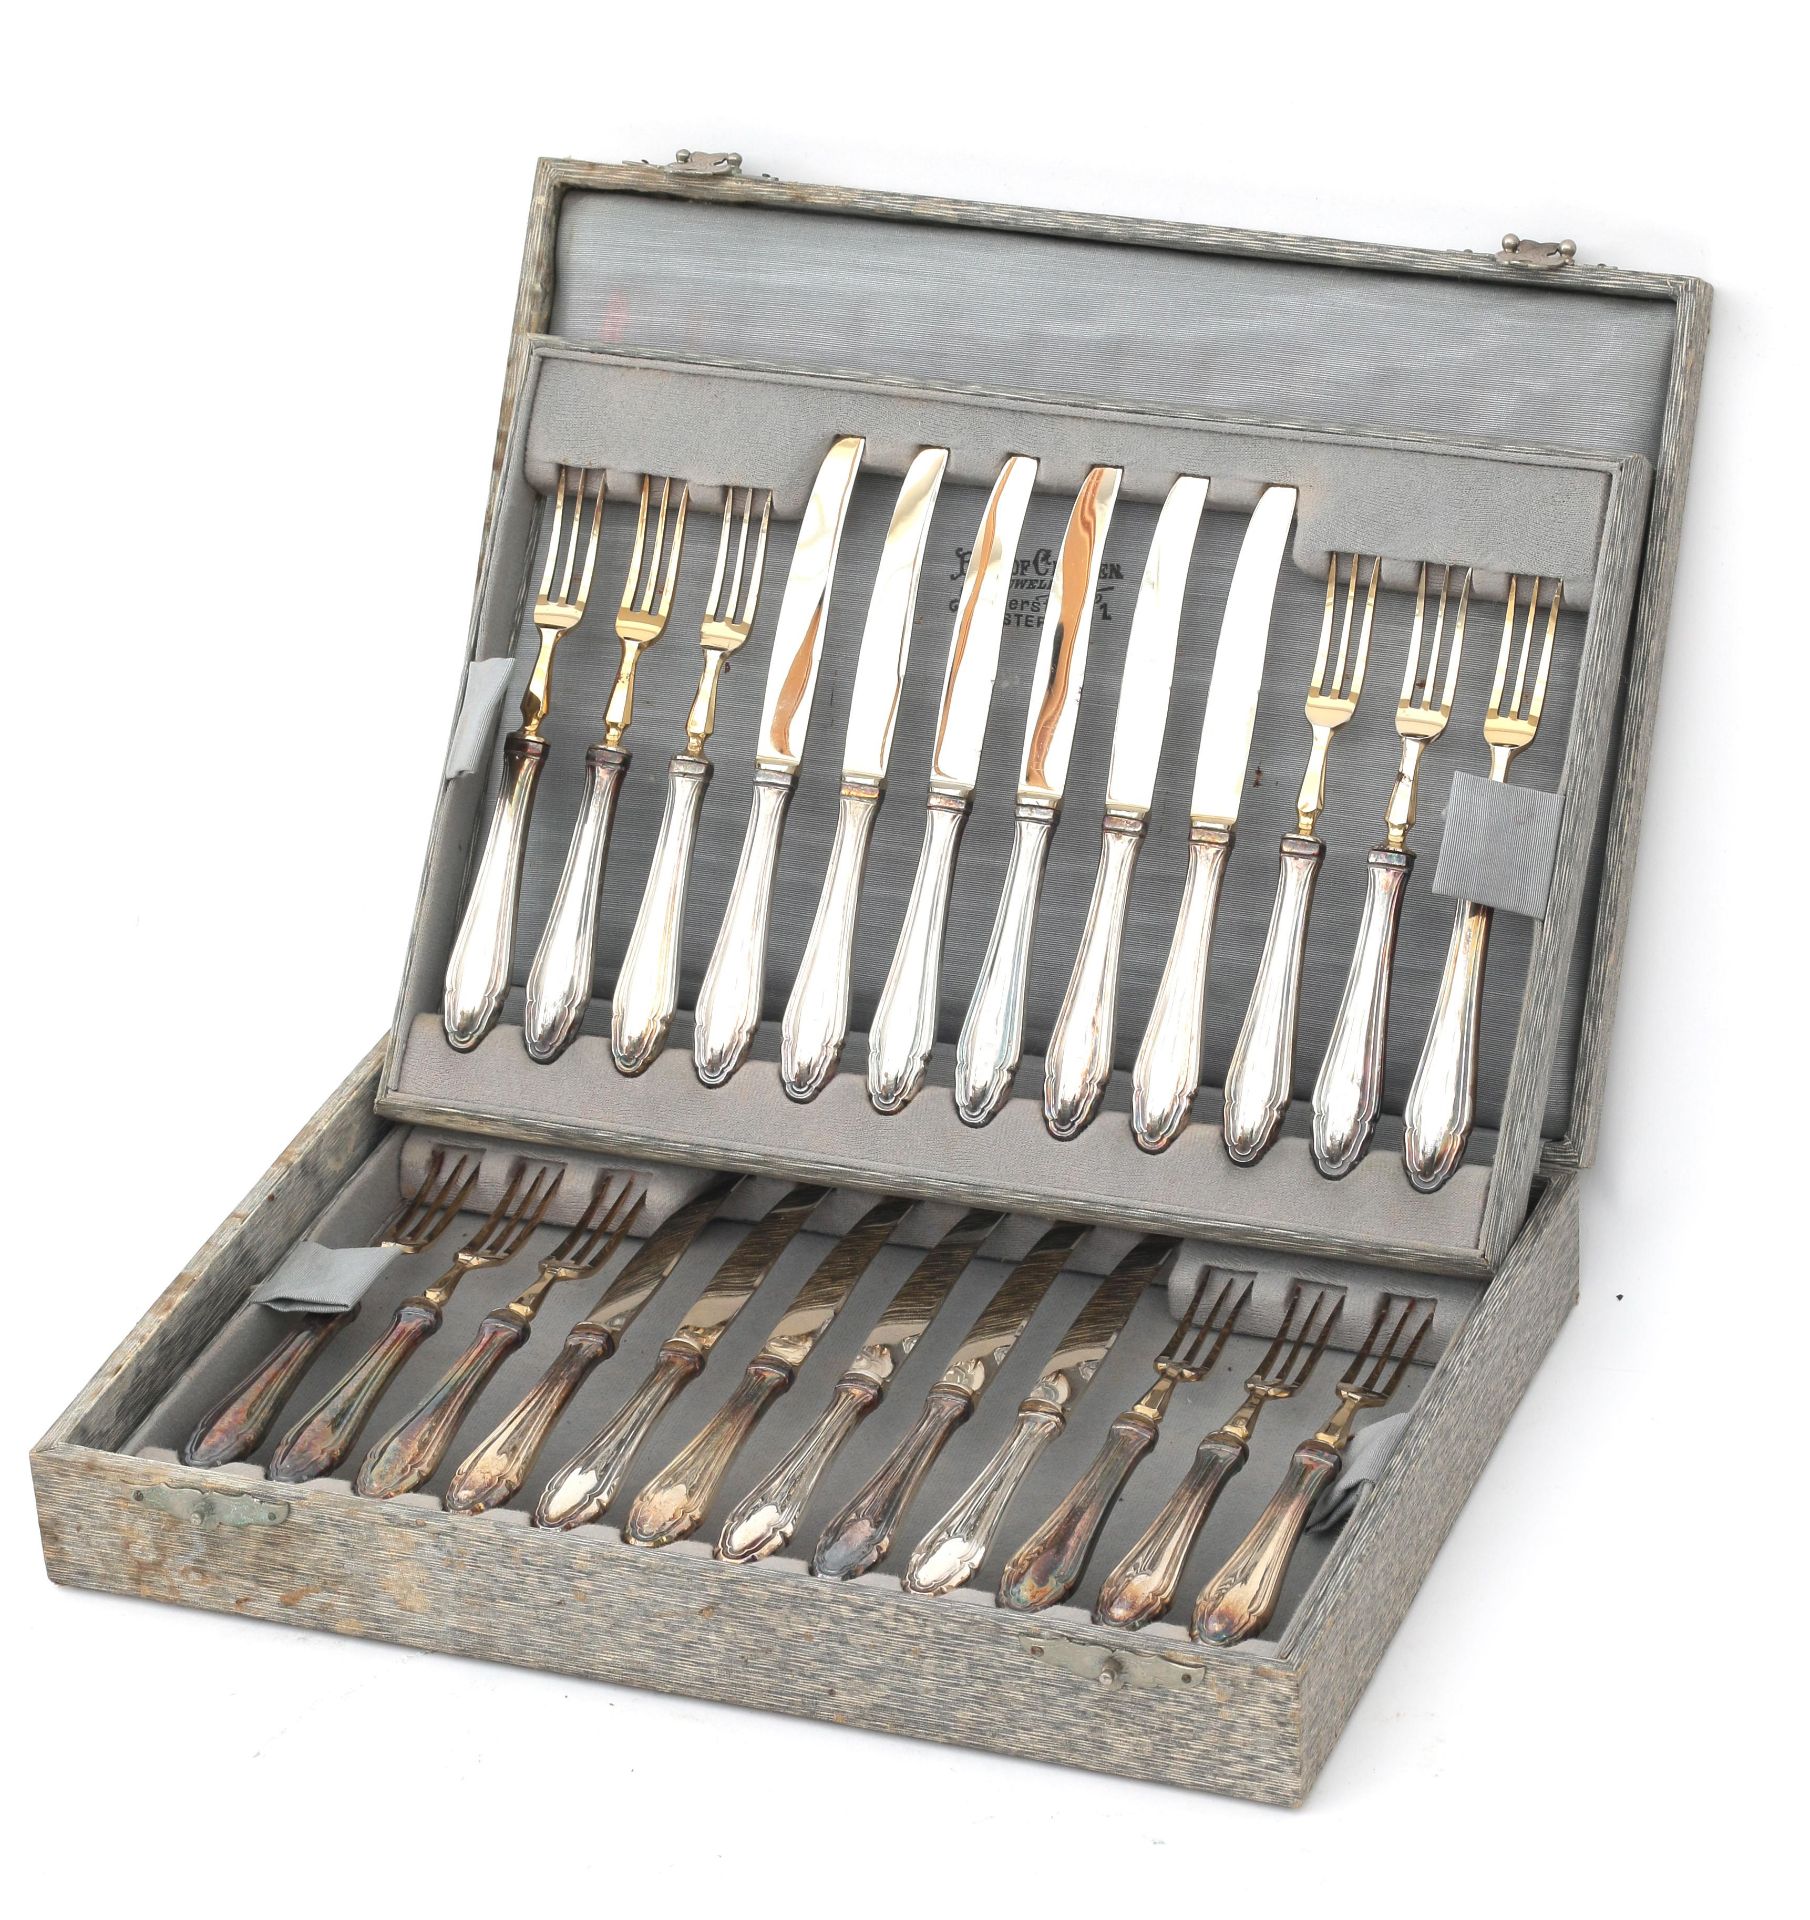 Twelve partially gilded fruit forks and fruit knives with 835 silver handles in case, adress: Roelof